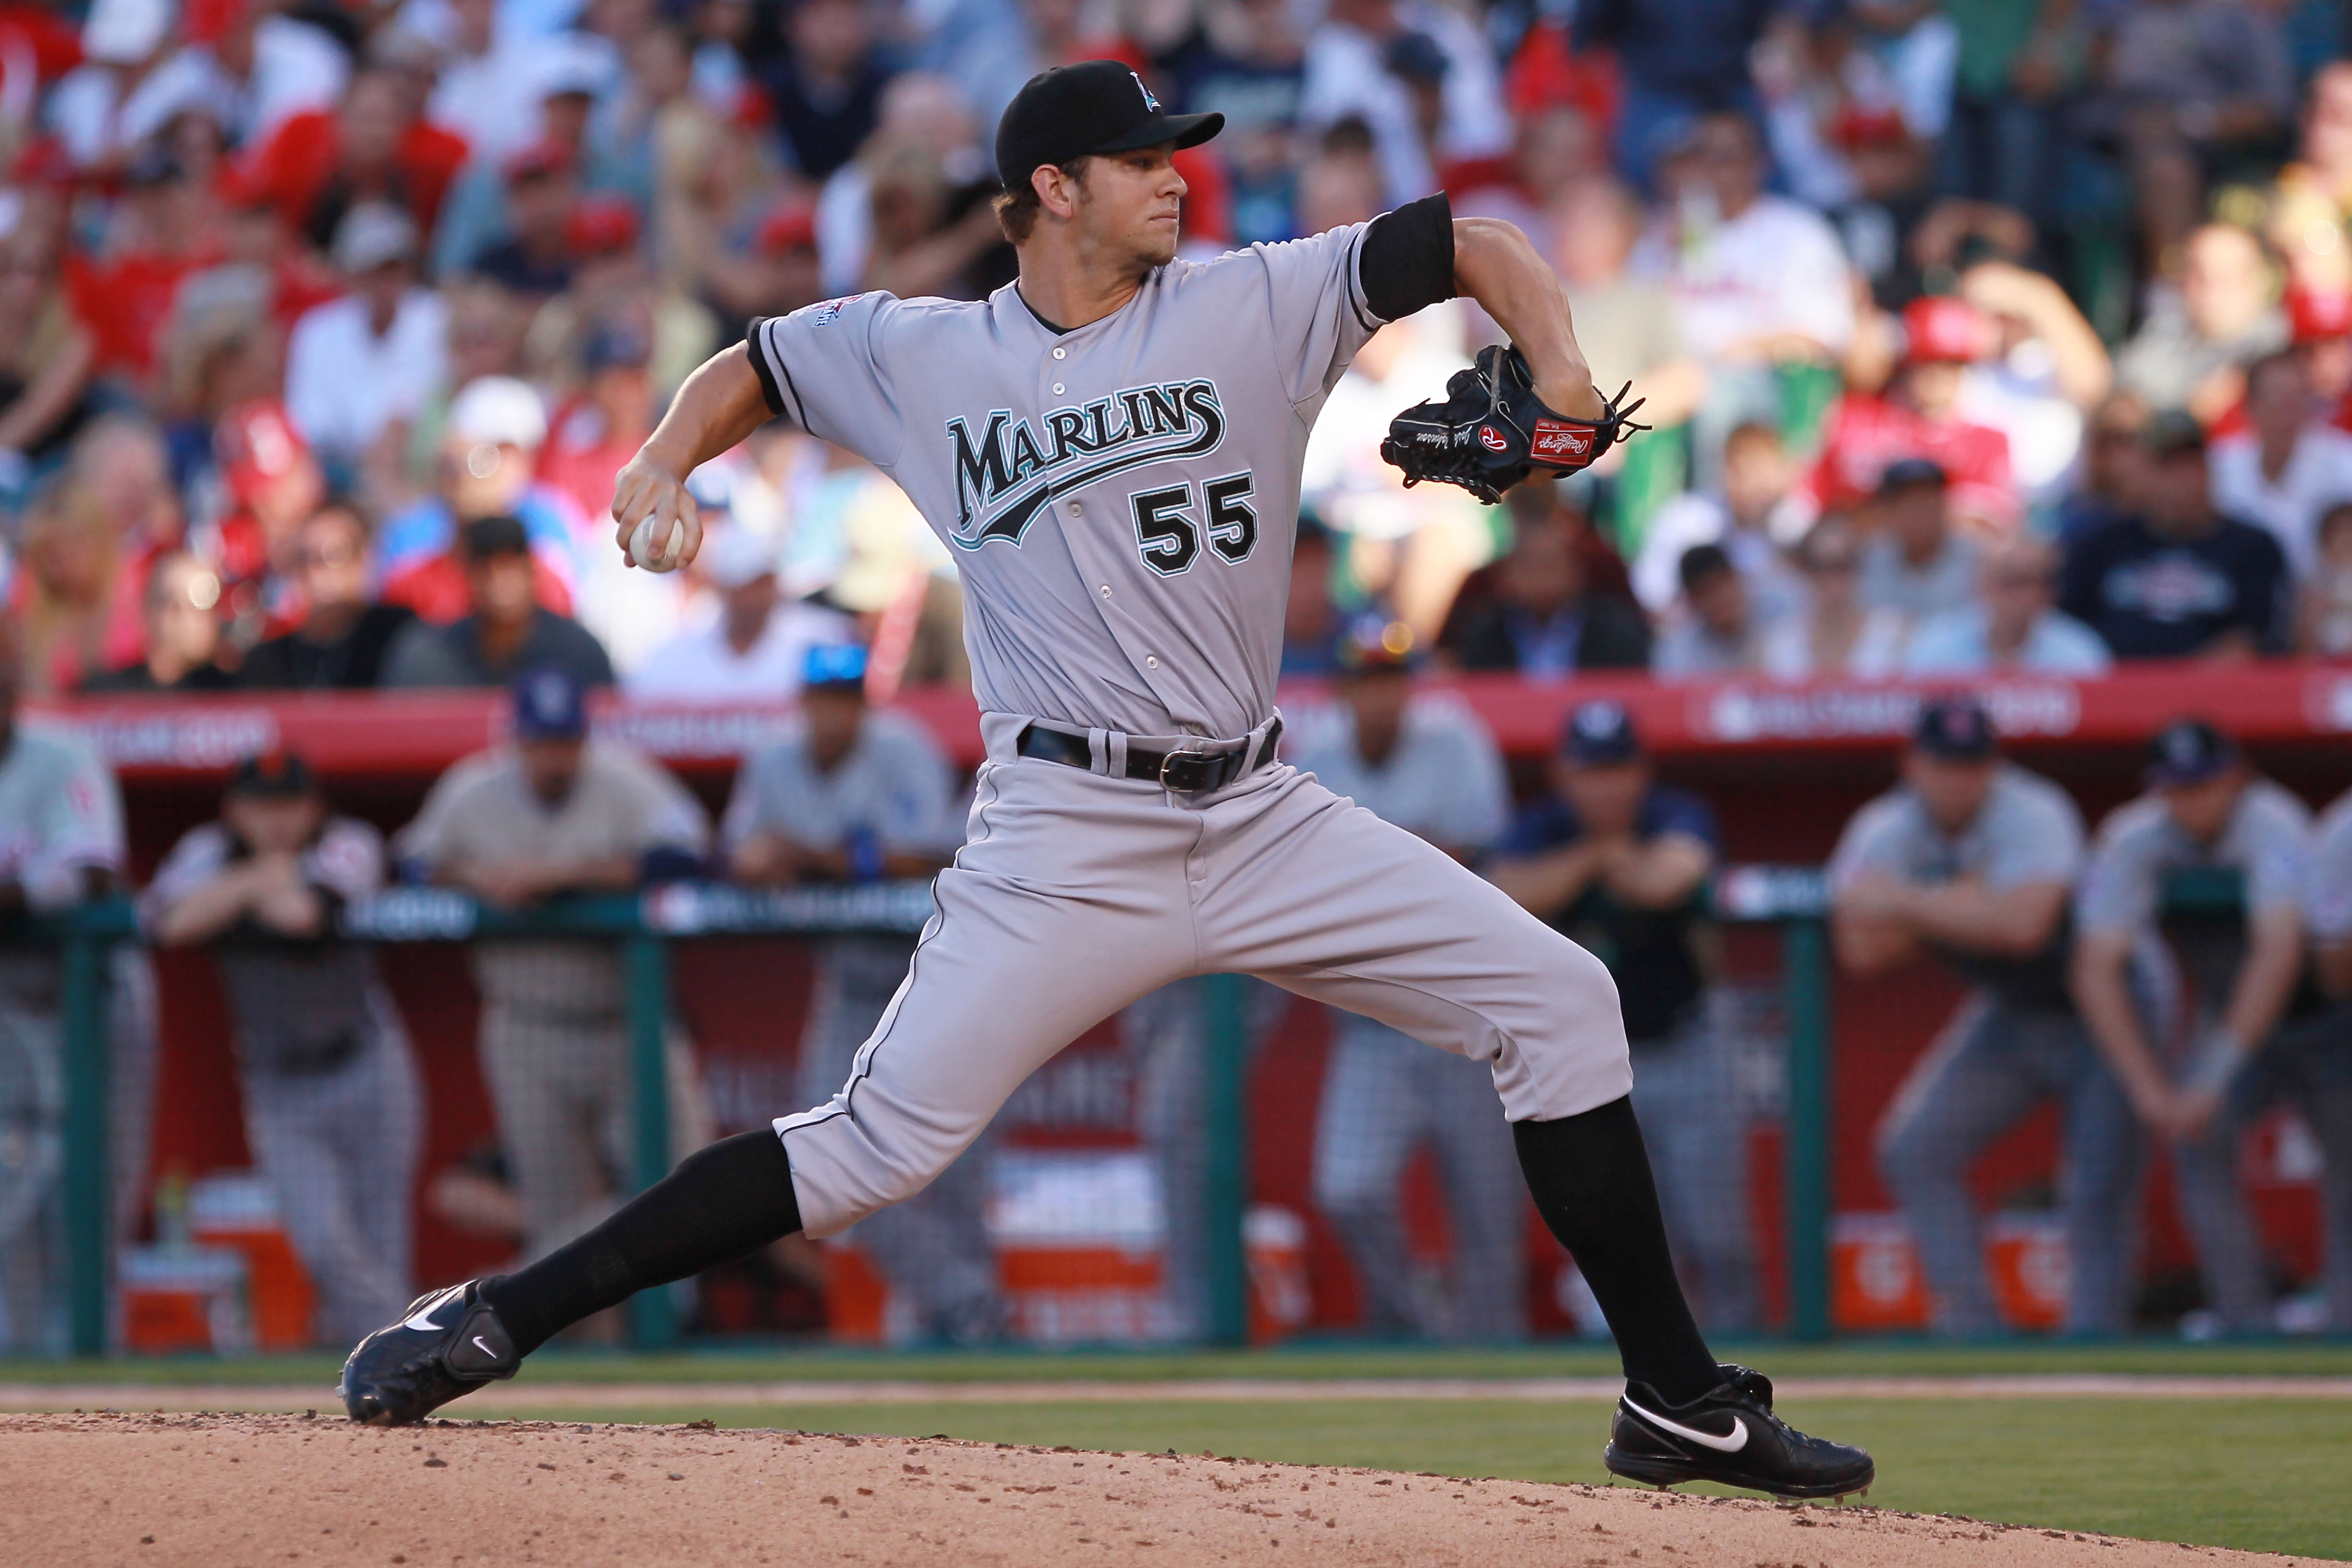 ANAHEIM, CA - JULY 13:  National League All-Star Josh Johnson #55 of the Florida Marlins throws a pitch during the 81st MLB All-Star Game at Angel Stadium of Anaheim on July 13, 2010 in Anaheim, California.  (Photo by Jeff Gross/Getty Images)